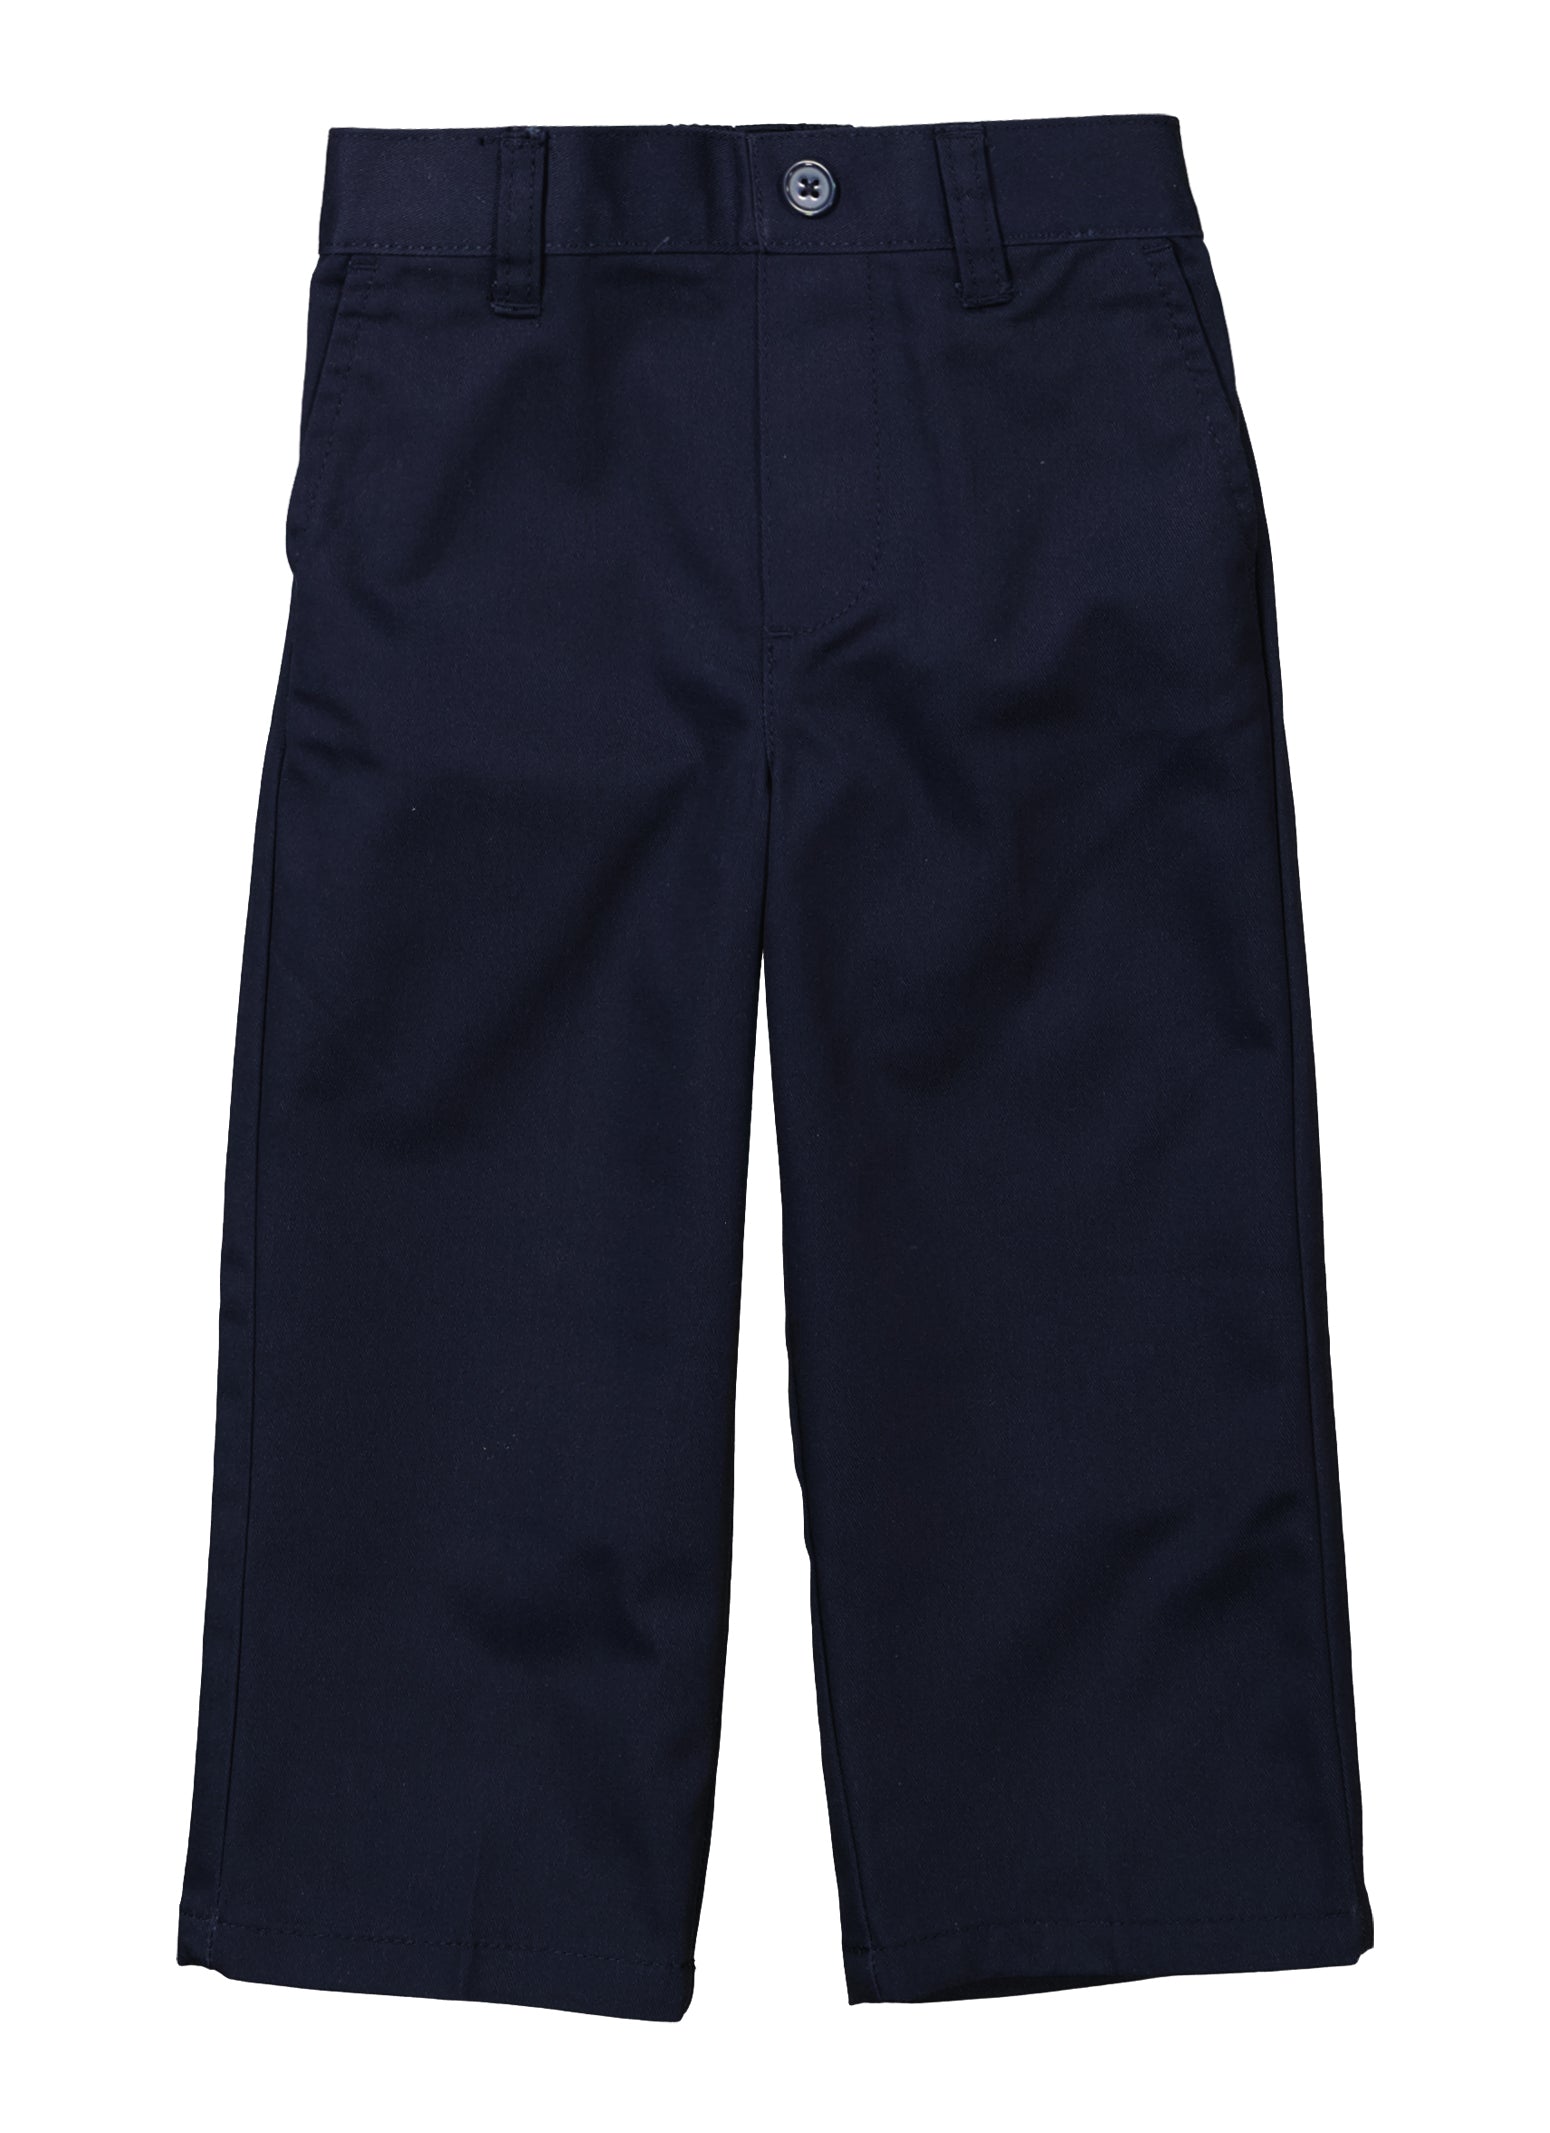 French Toast Boys 2T-4T Relaxed Fit Chinos, Blue, Size 2T